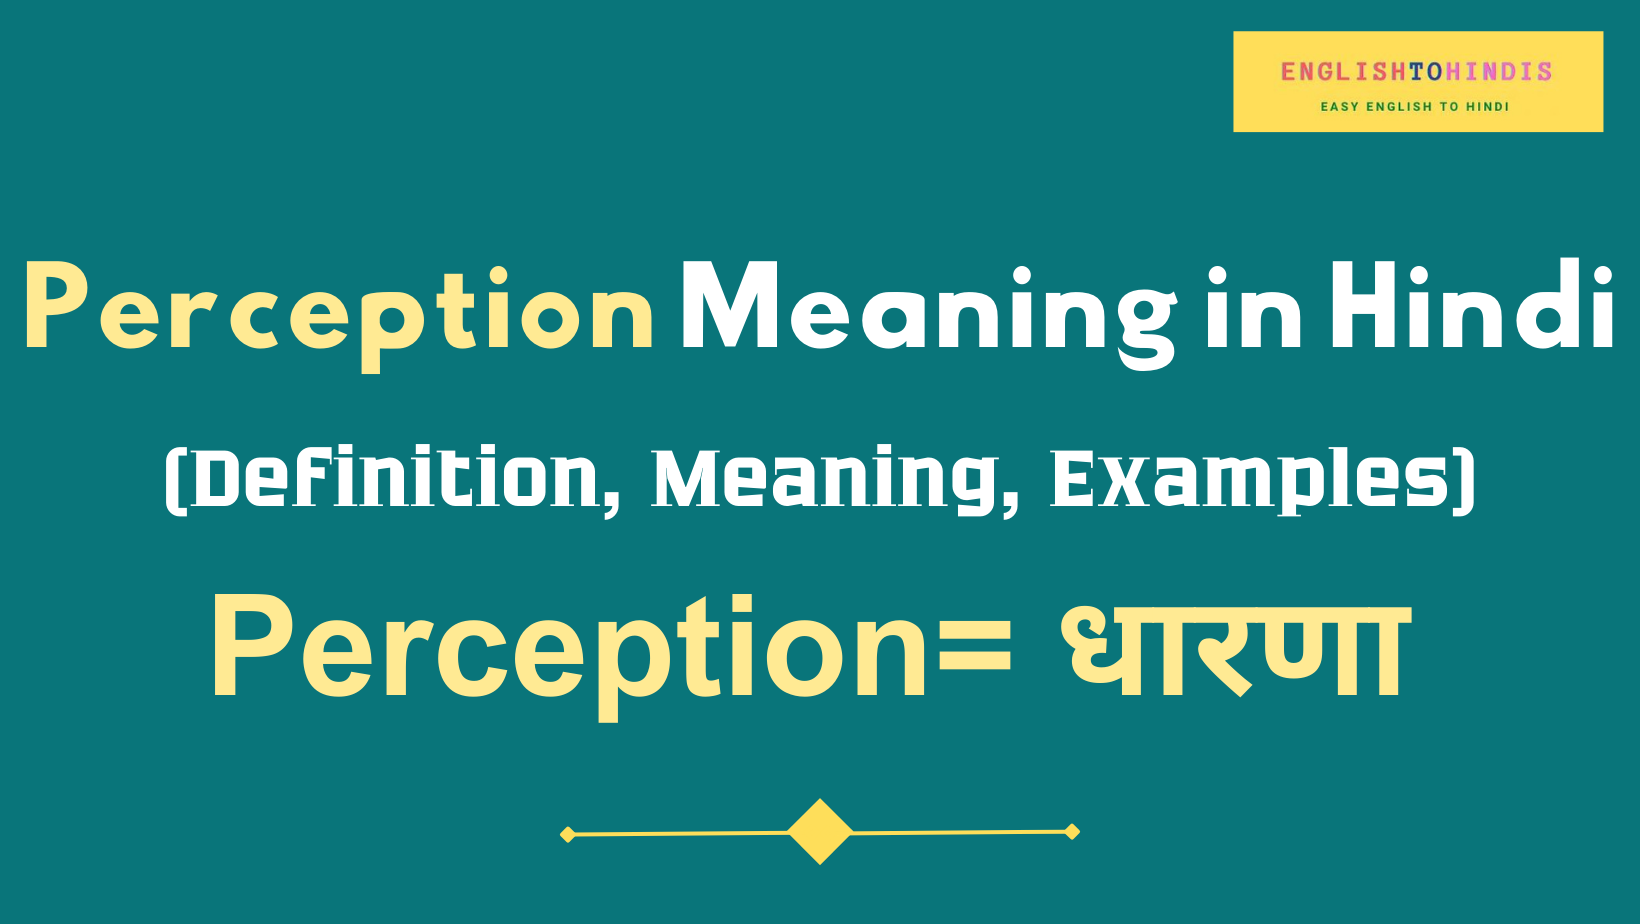 Perception Meaning in Hindi